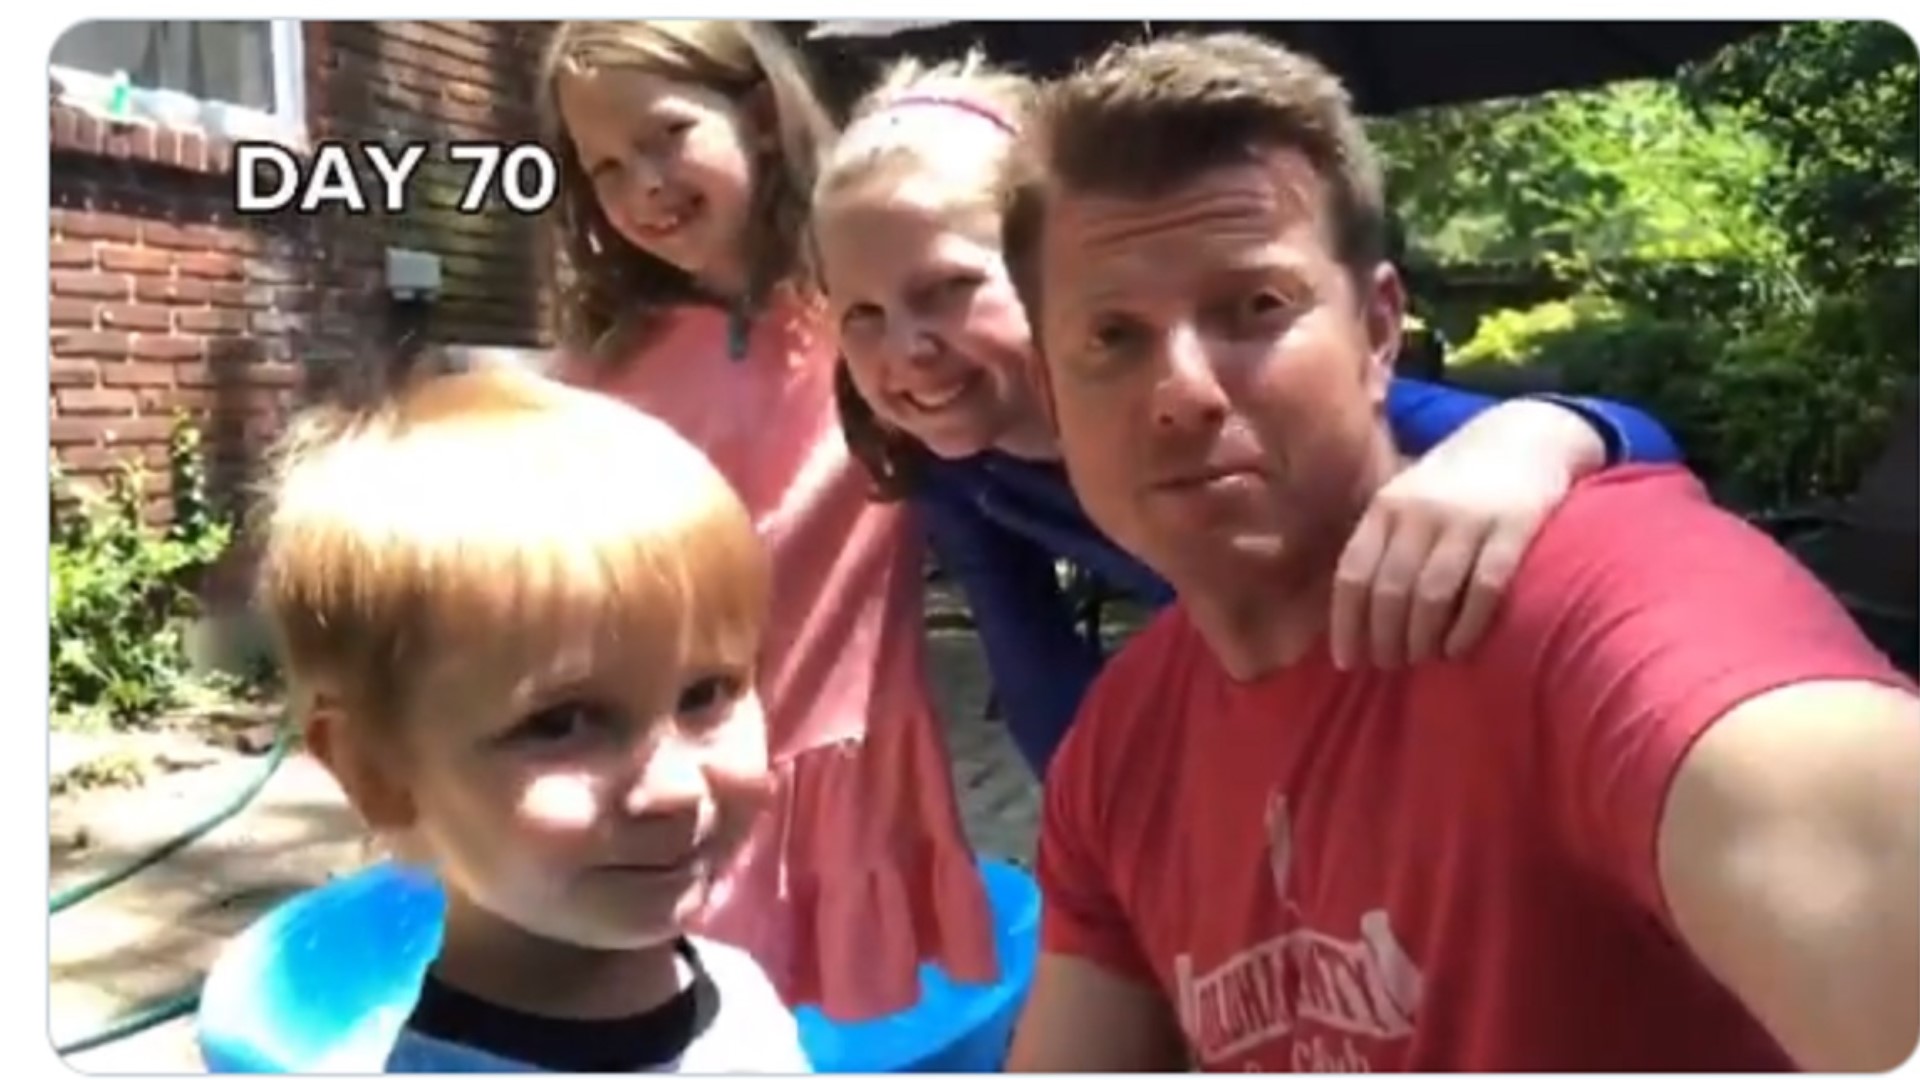 WHAS11 News Kent Spencer and family surviving the pandemic at home in the most unique ways ever. Here's a look at pool day and 70th day in the series.